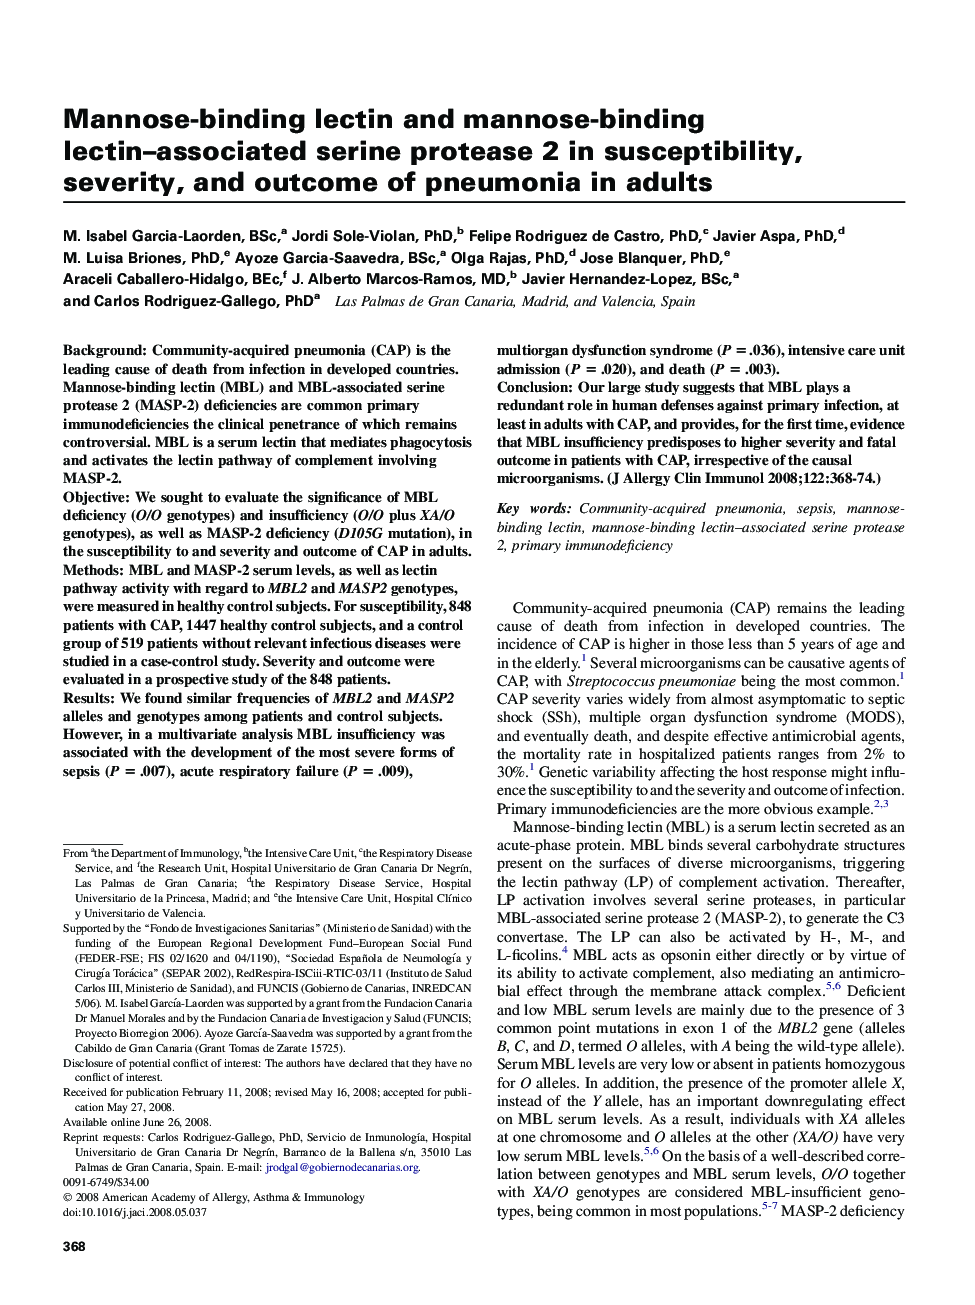 Mannose-binding lectin and mannose-binding lectin-associated serine protease 2 in susceptibility, severity, and outcome of pneumonia in adults